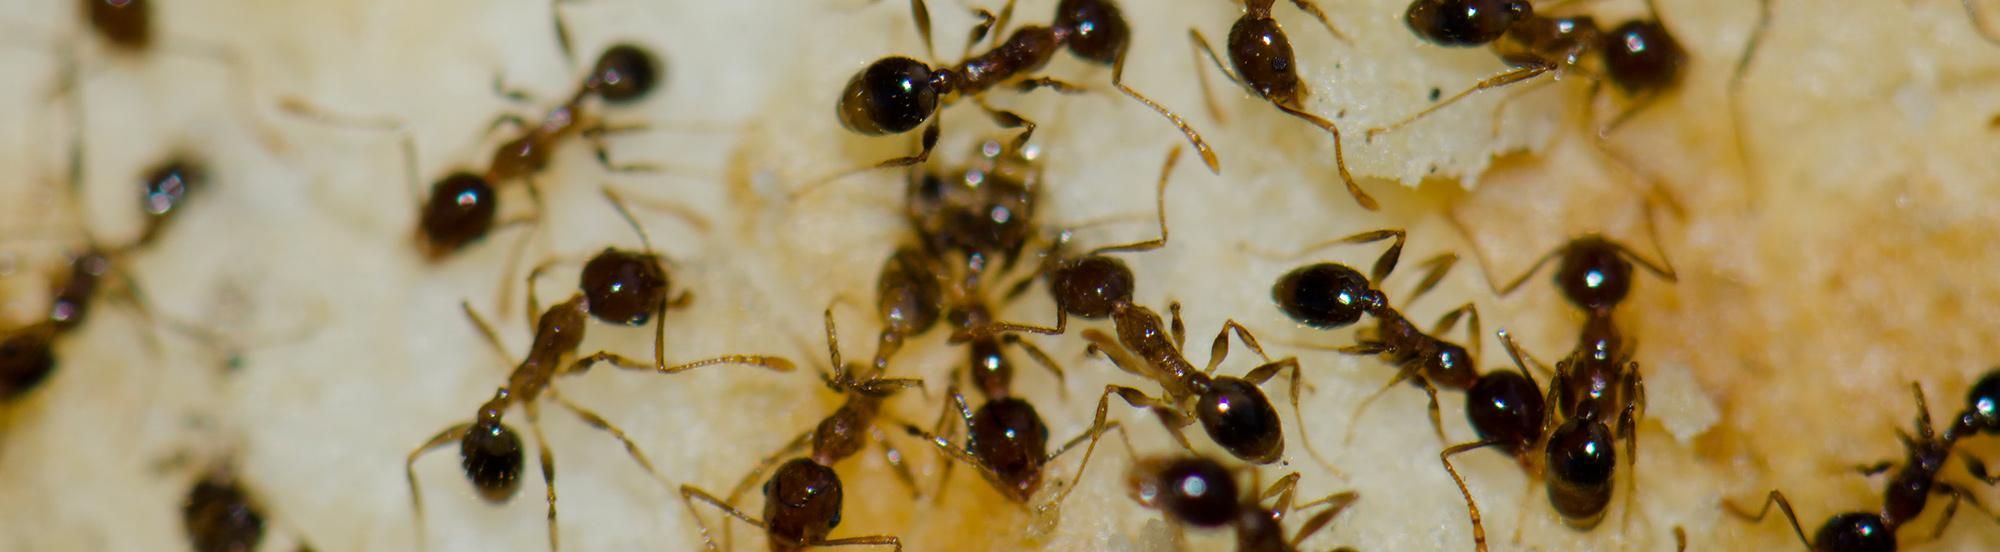 argentine ants searching for food